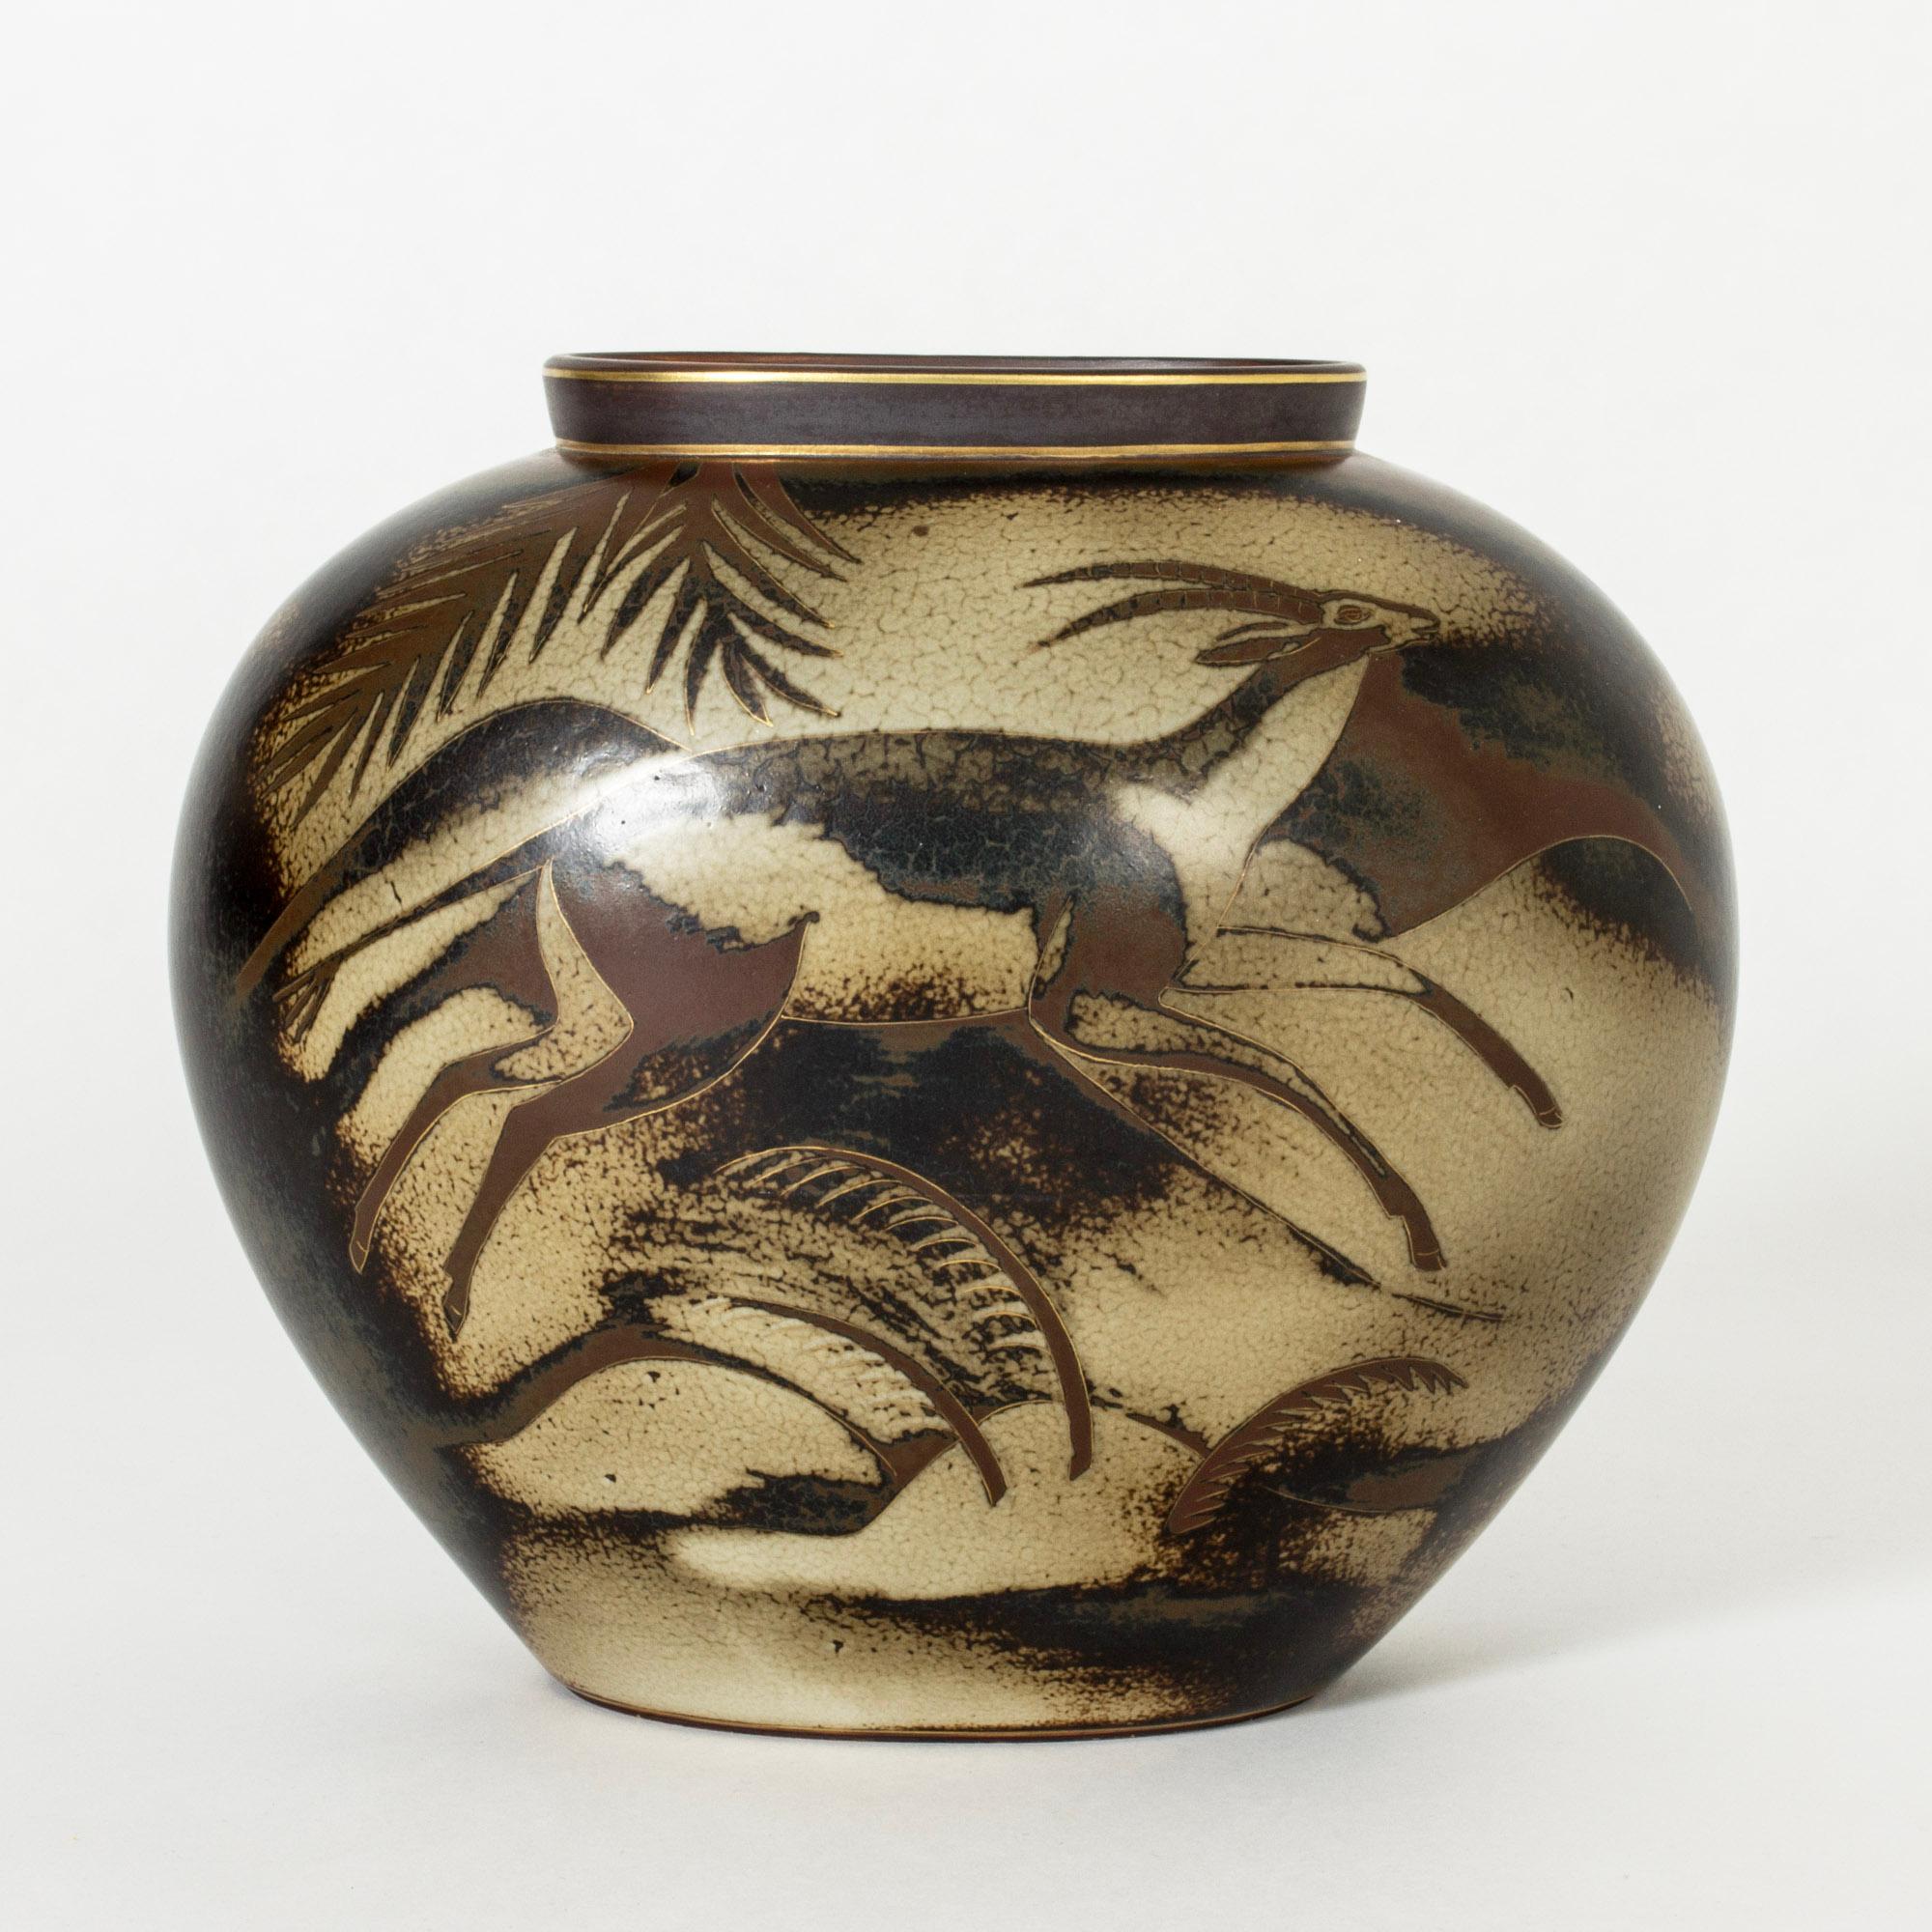 Striking stoneware vase by Gunnar Nylund, from the “Flambé” series. Dramatic decor of a lion hunting antelope on the savannah. Gold decor accentuate the lines.

Gunnar Nylund was one of the most influential ceramicists and designers of the Swedish